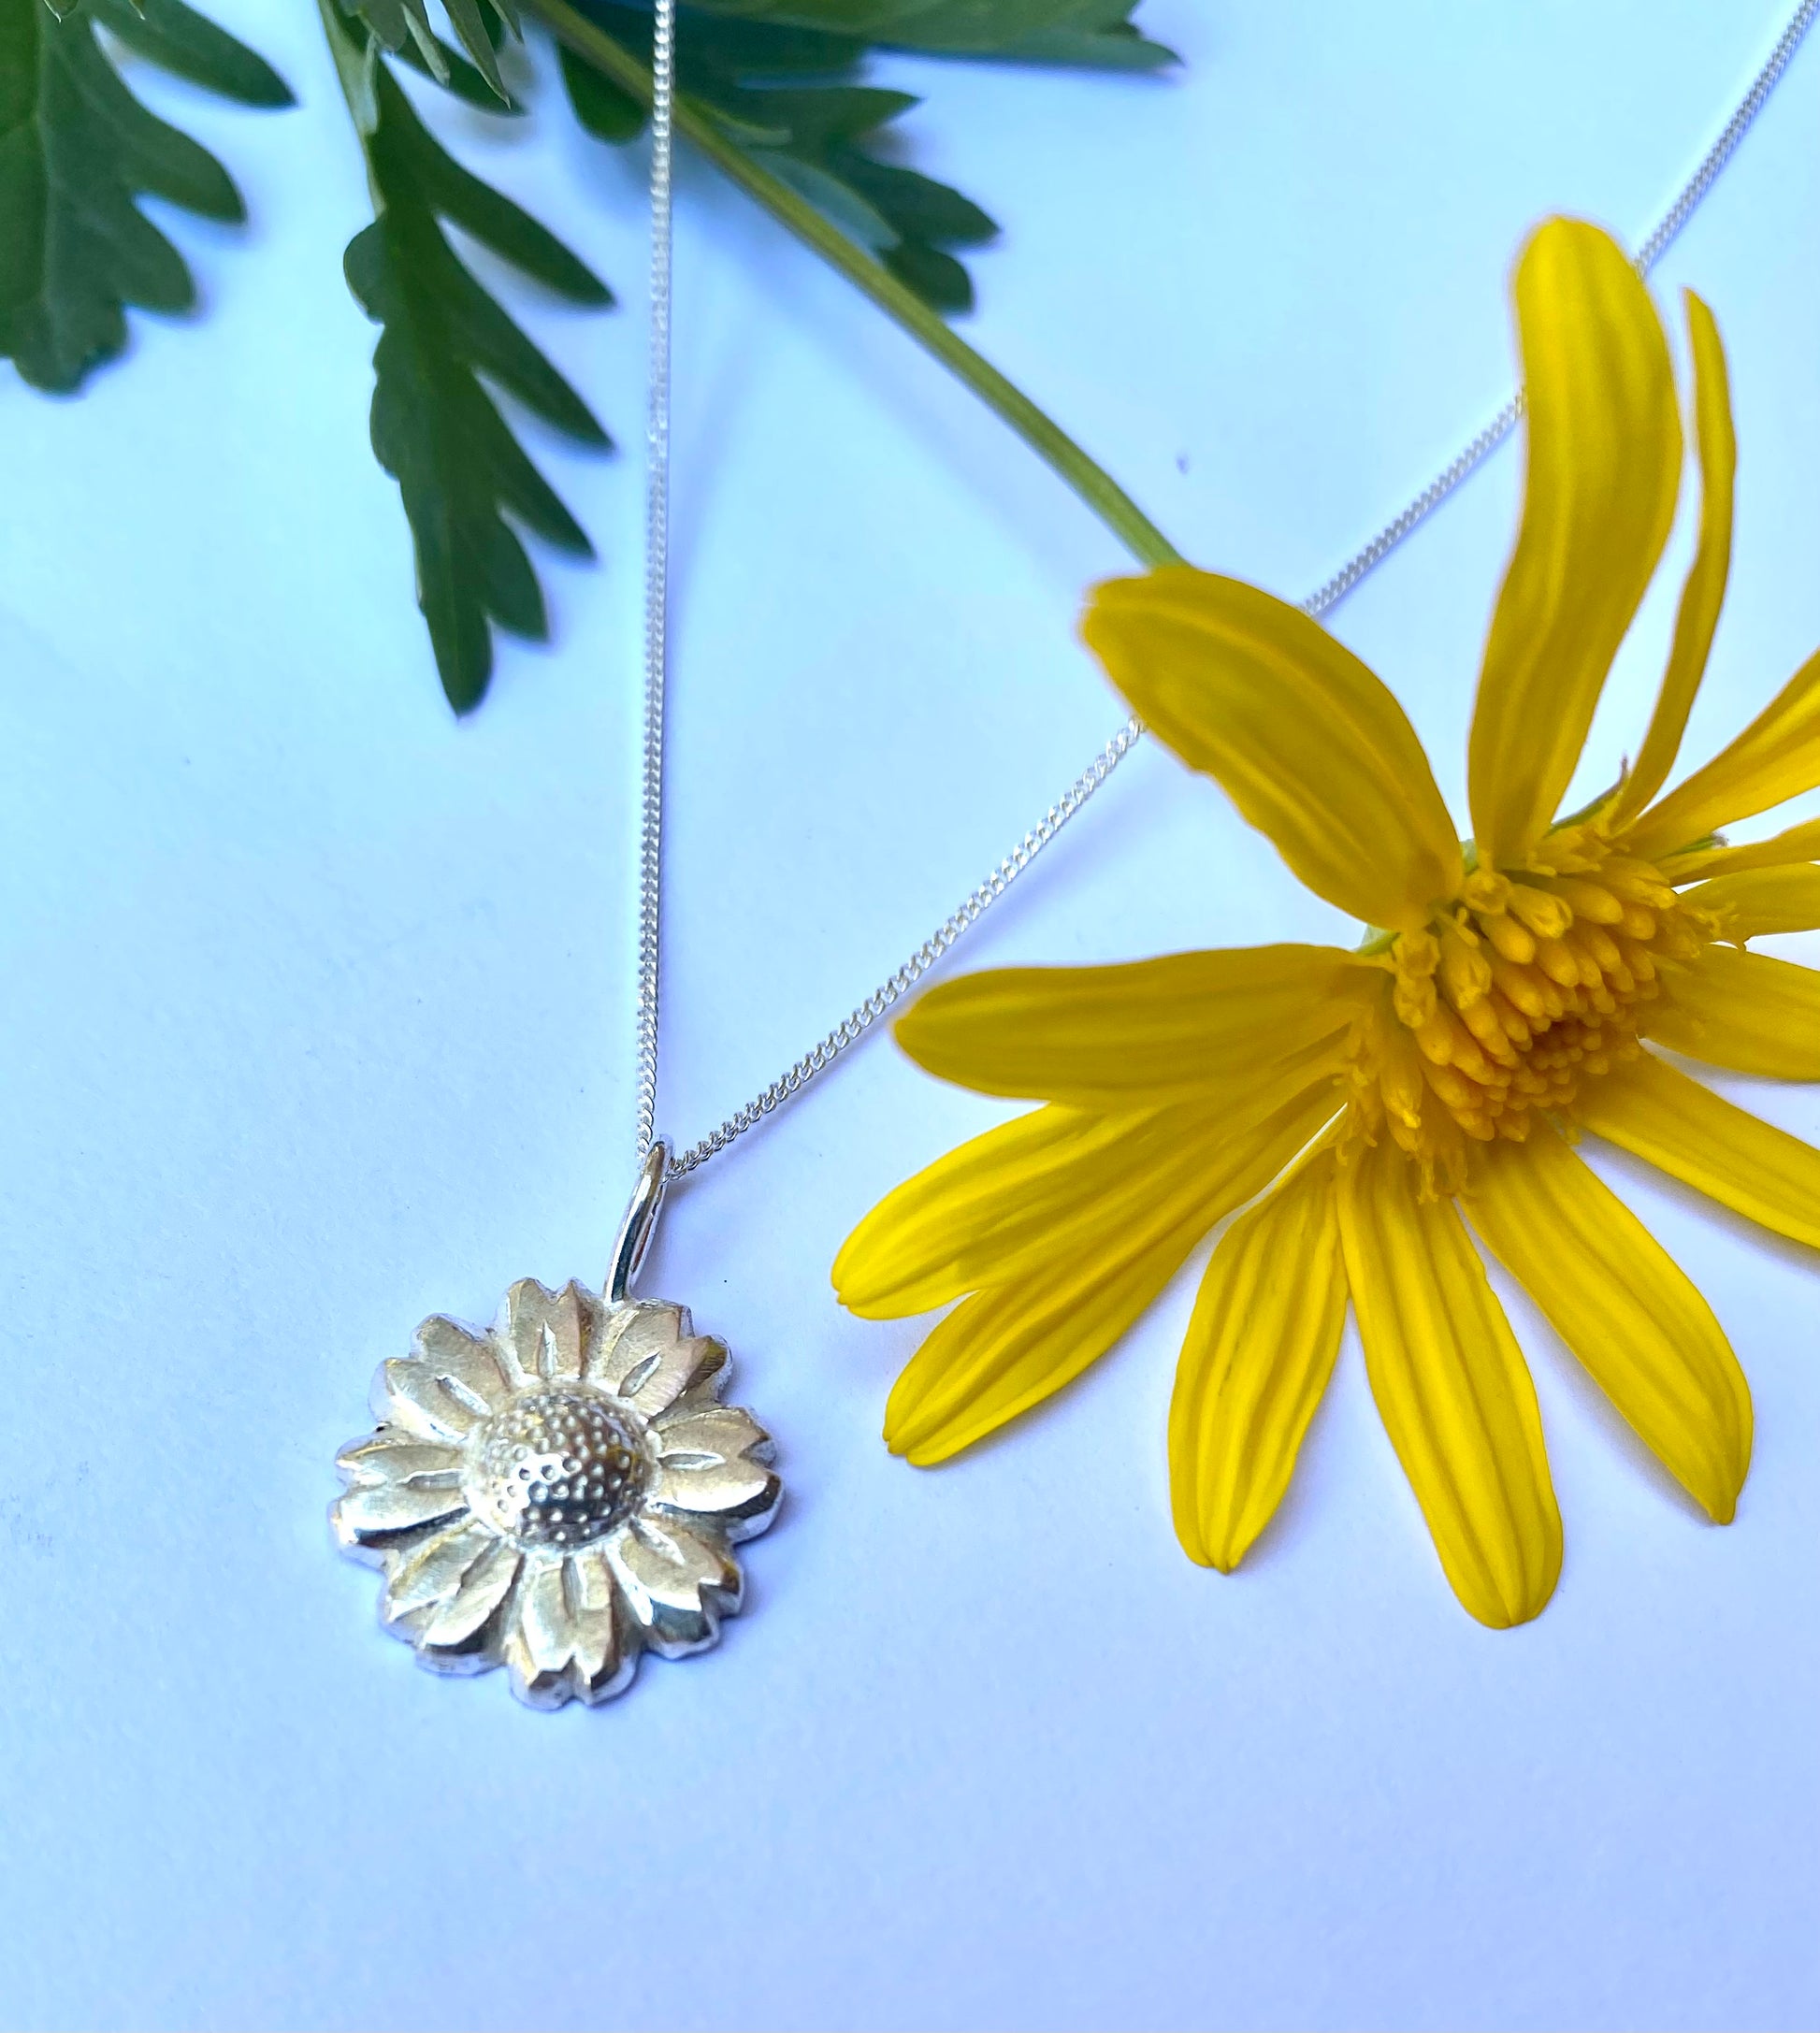 Close-up of shiny Daisy Flower pendant against a fresh yellow daisy backdrop, highlighting the pendant’s detail.